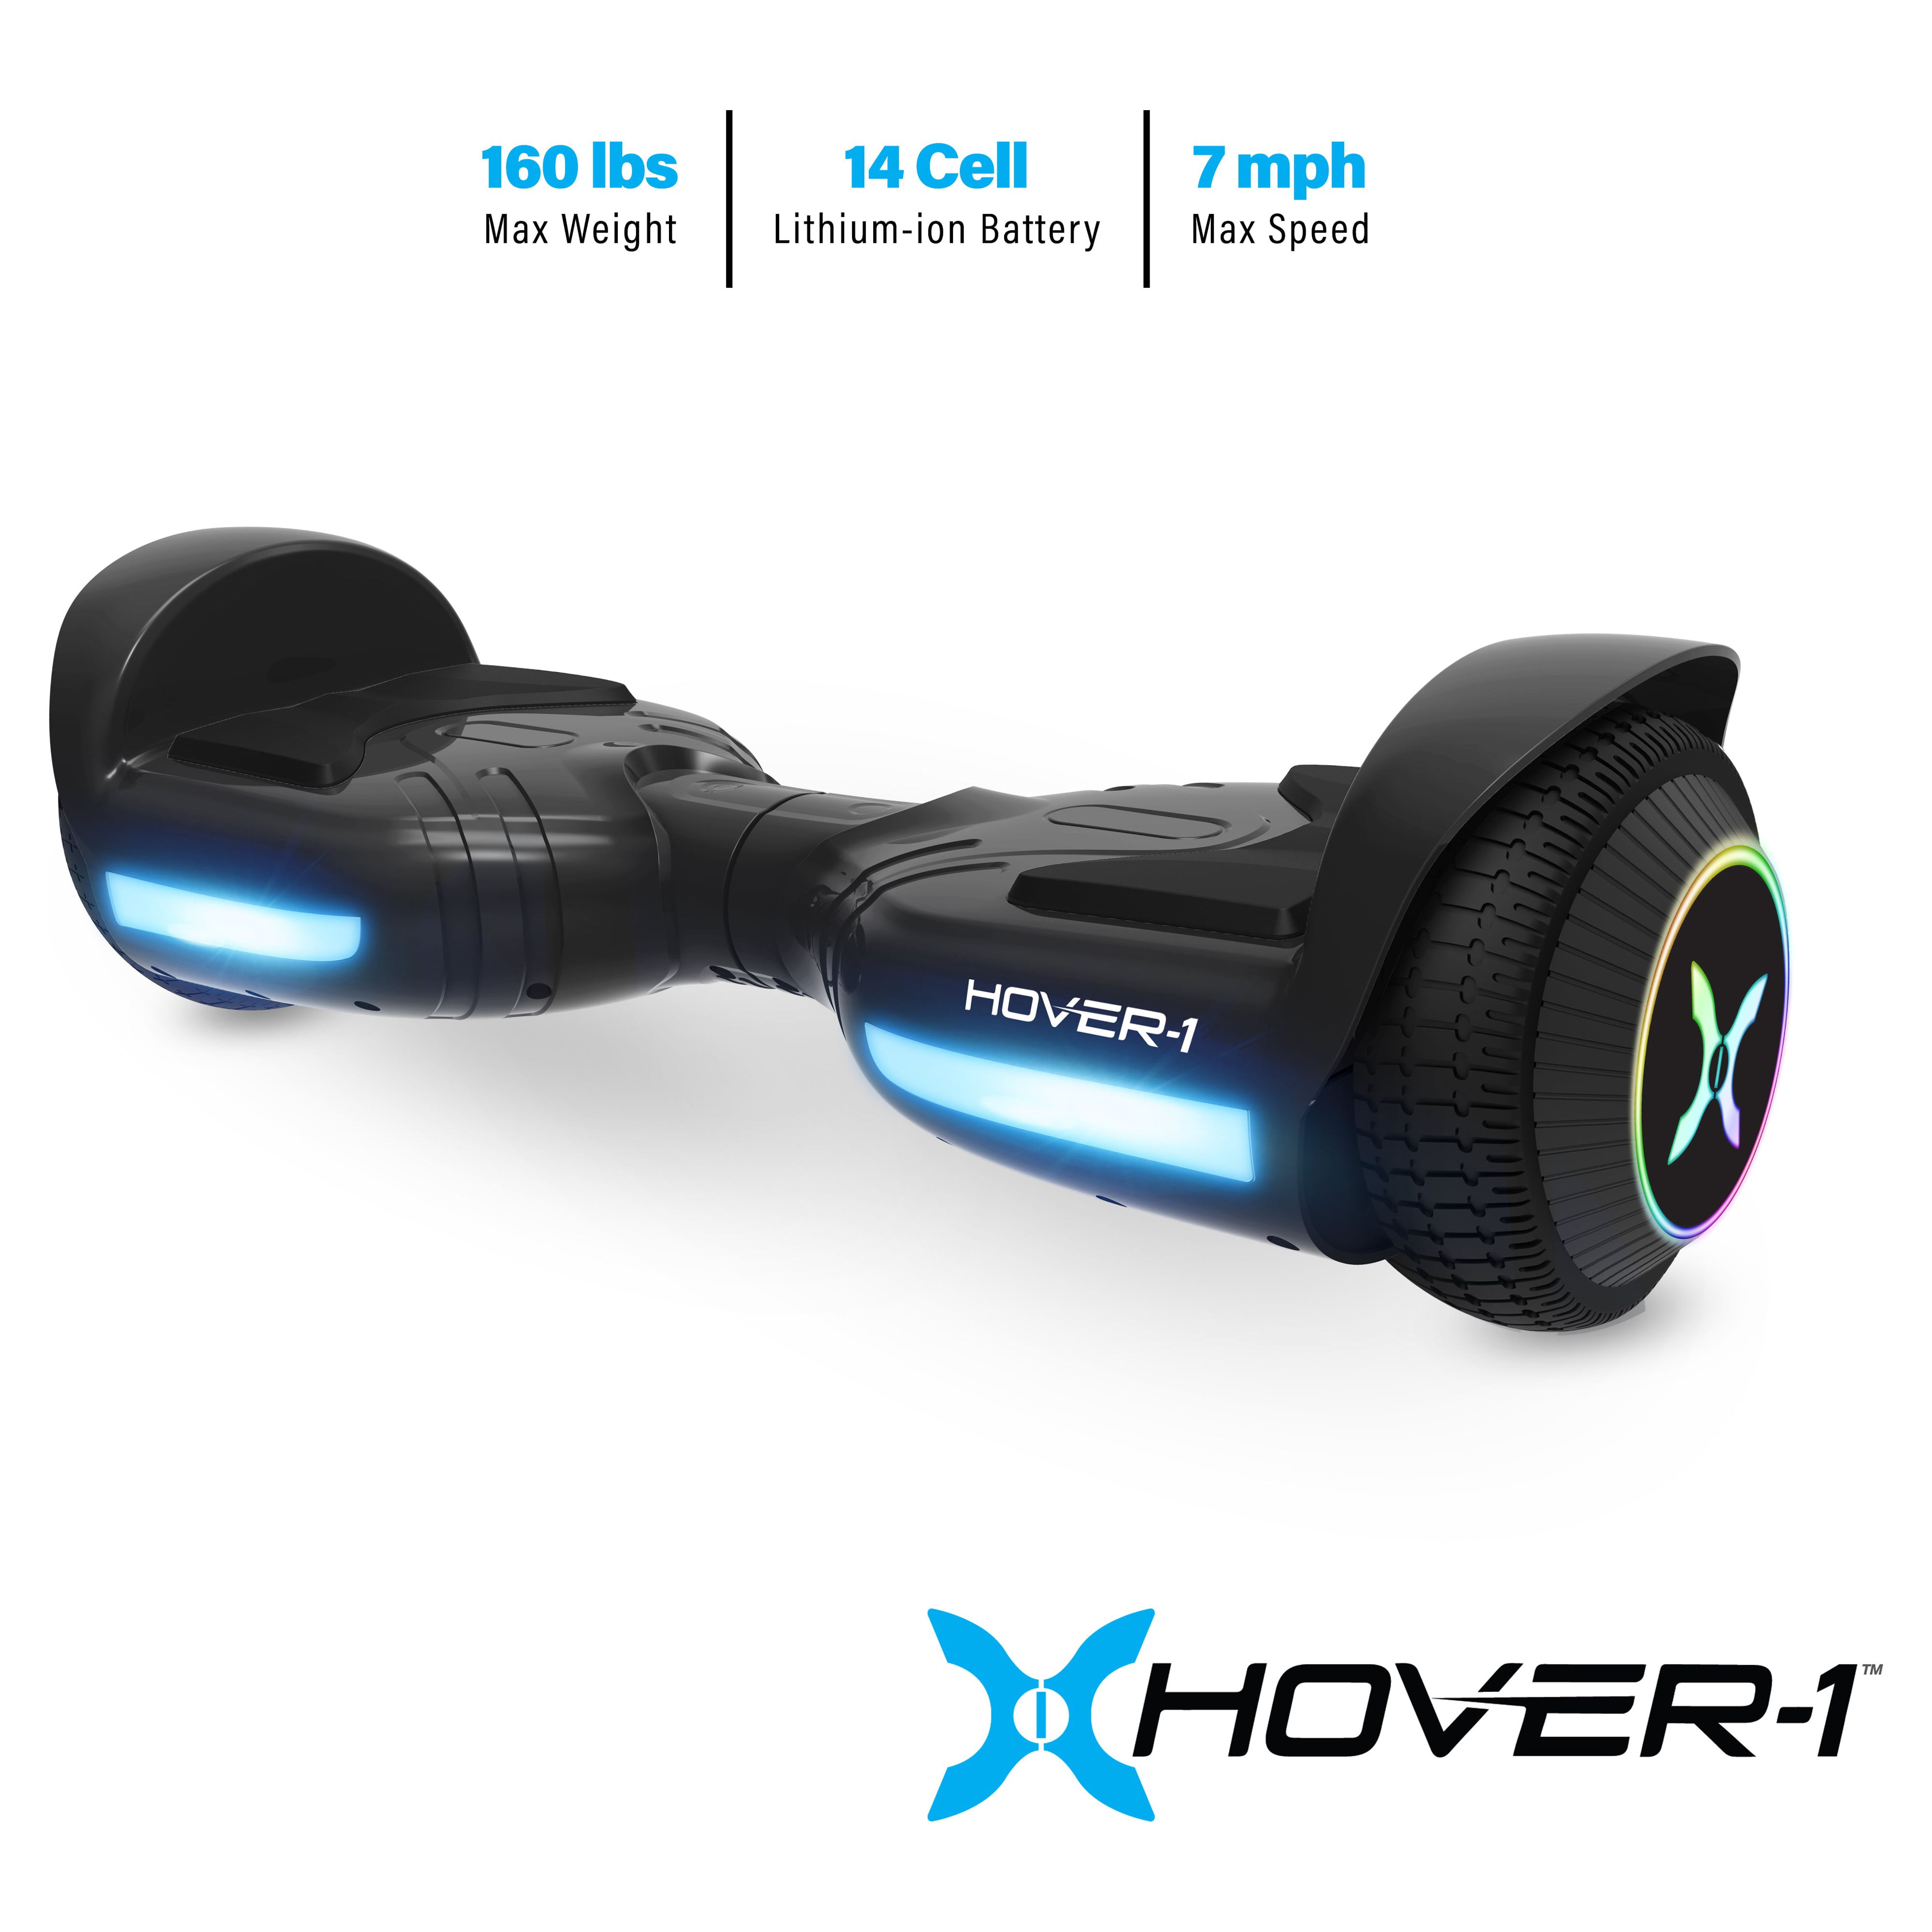 Hover-1 Nova Hoverboard Max Distance 6 Miles - image 8 of 11